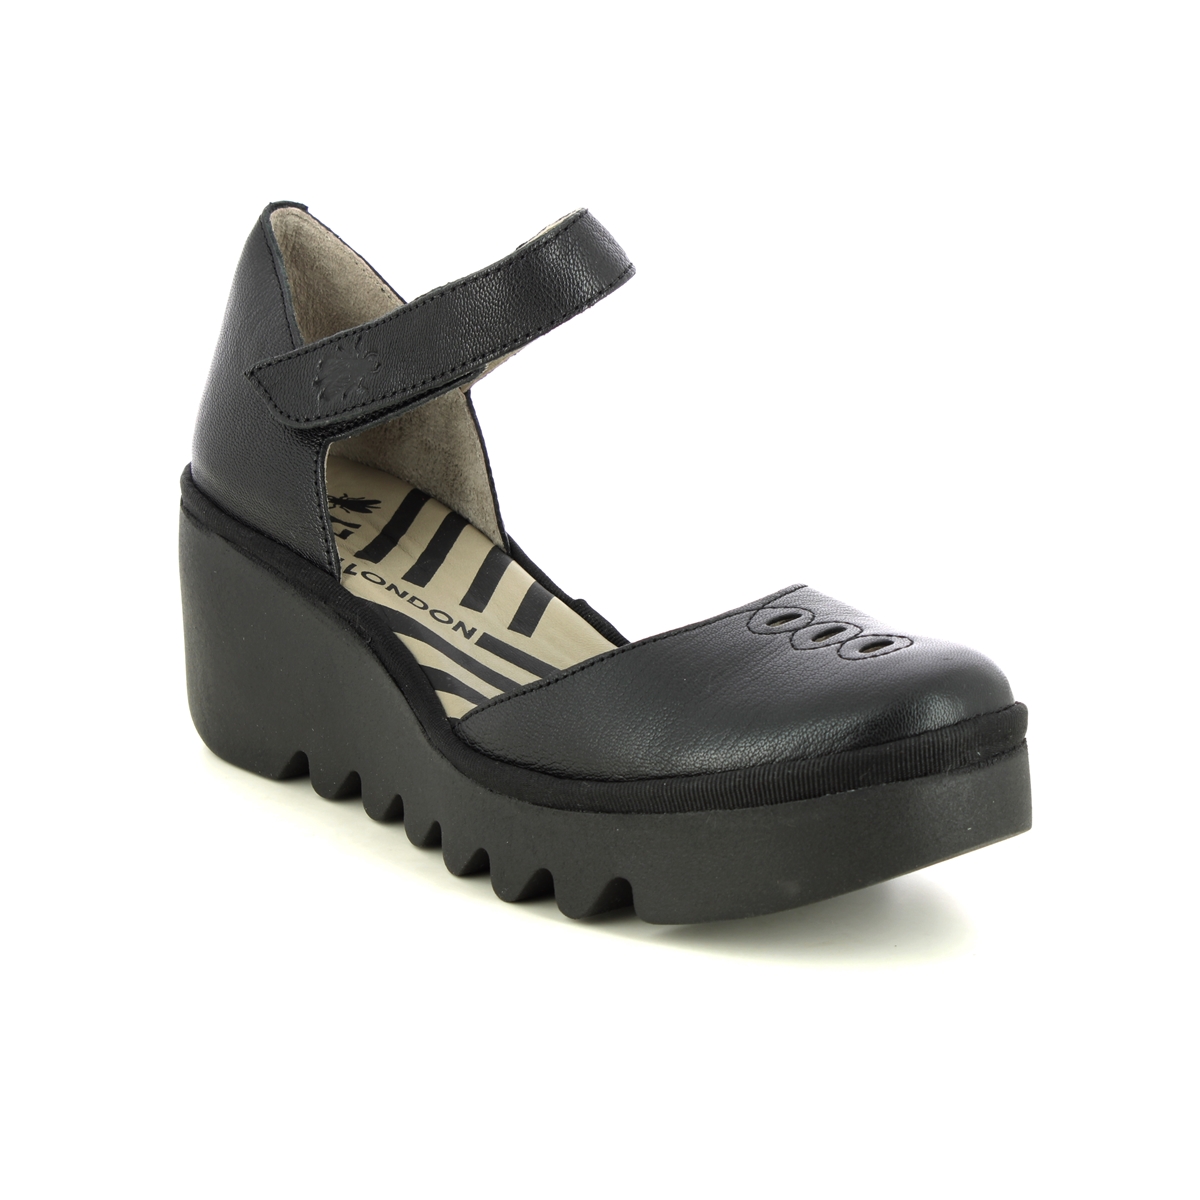 Fly London Biso Wedge Blu Black leather Womens Wedge Shoes P501305-010 in a Plain Leather in Size 37